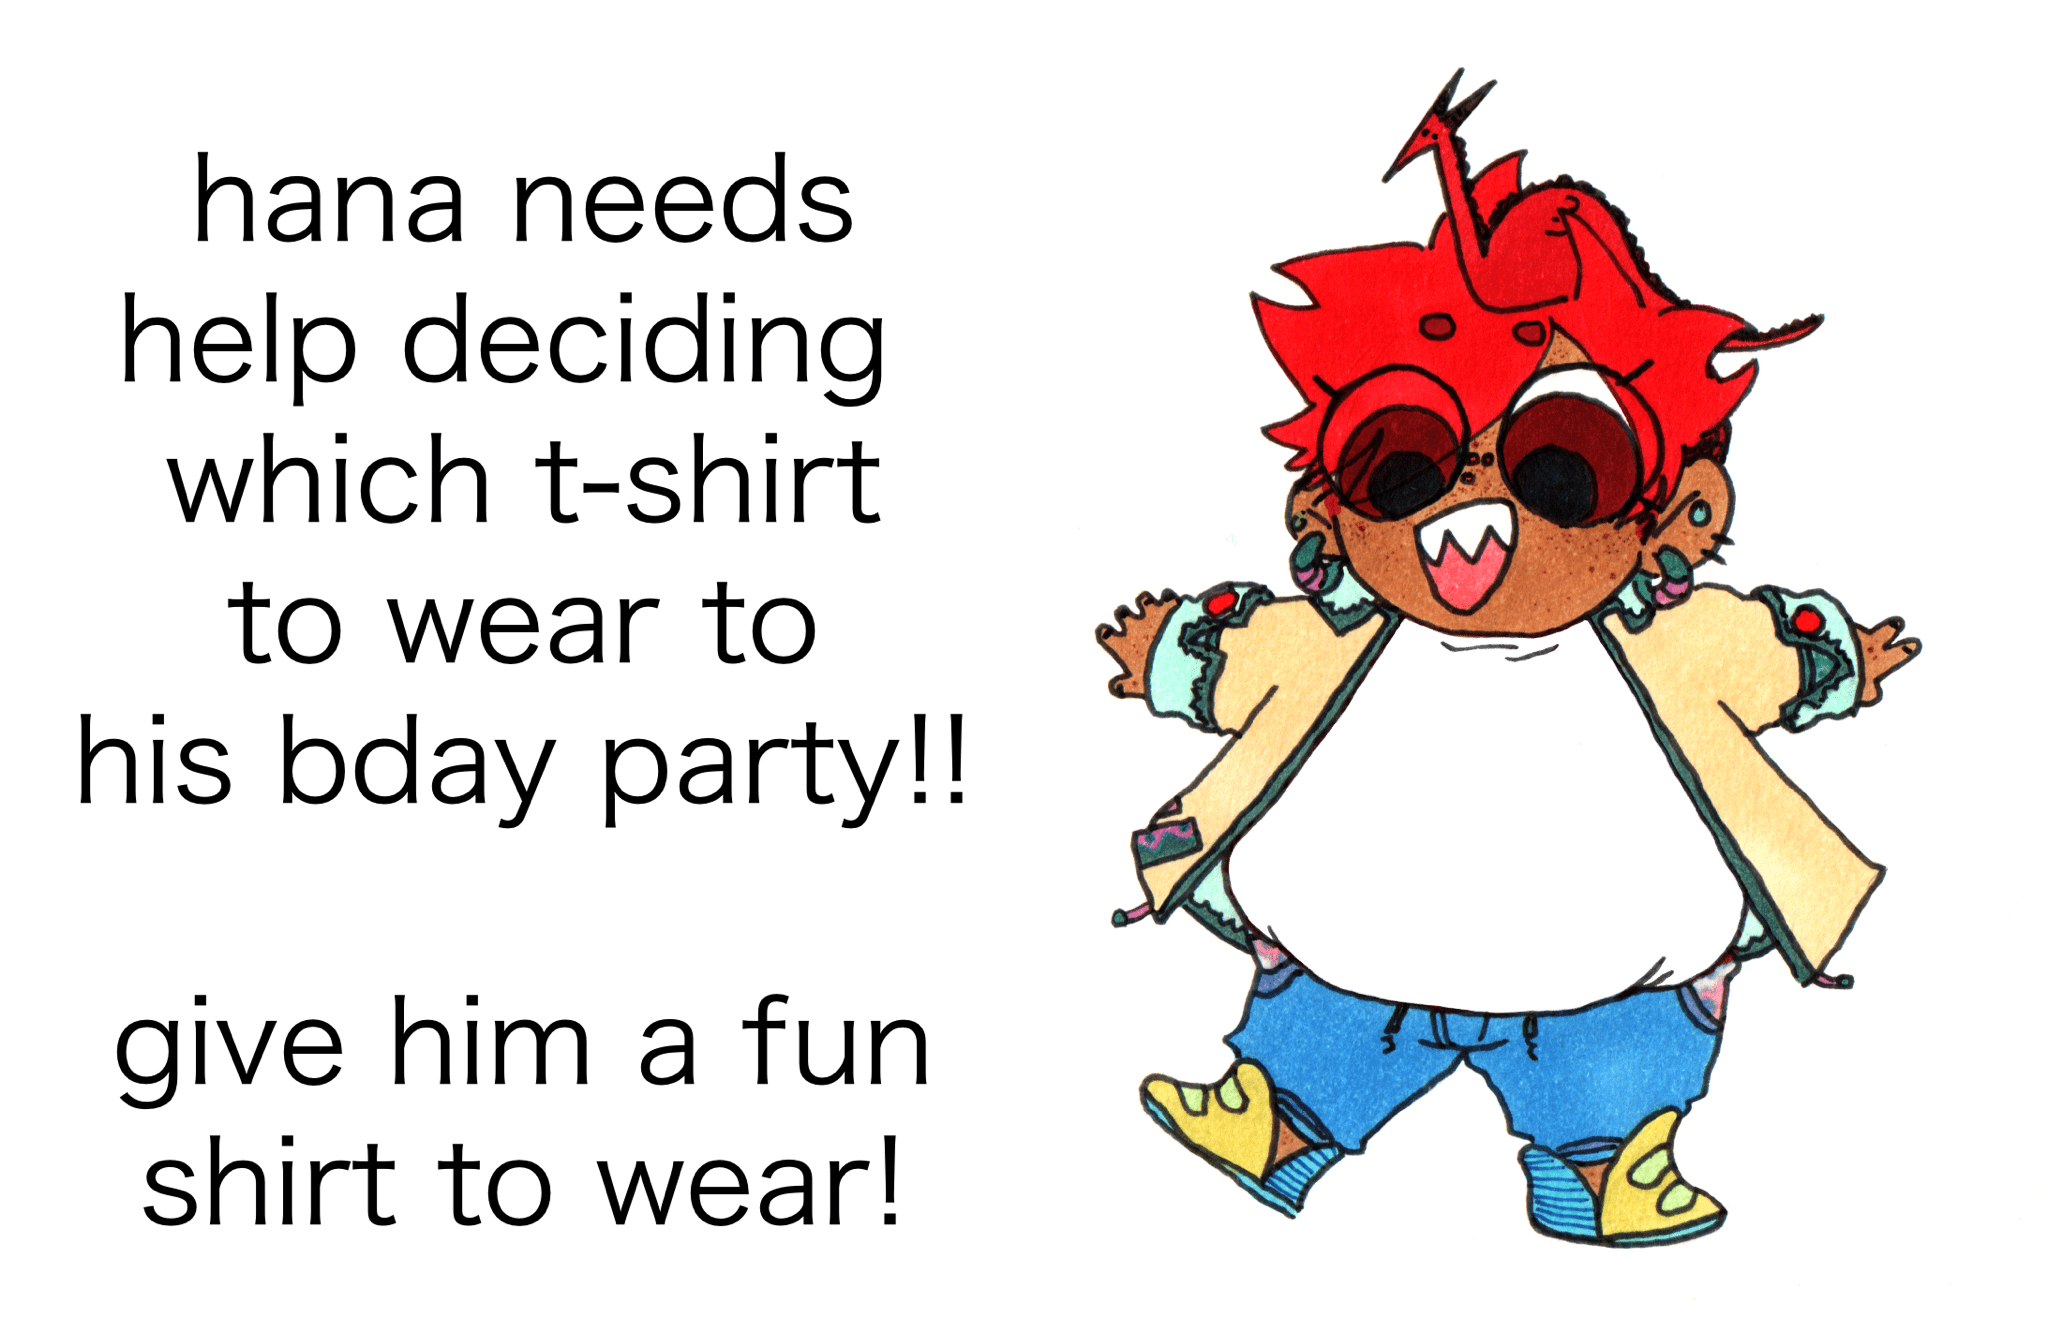 a drawing of chibi hana from the webcomic kings of sorts, with a blank shirt. text reads: "hana needs help deciding which t-shirt to wear to his bday party! give him a shirt to wear